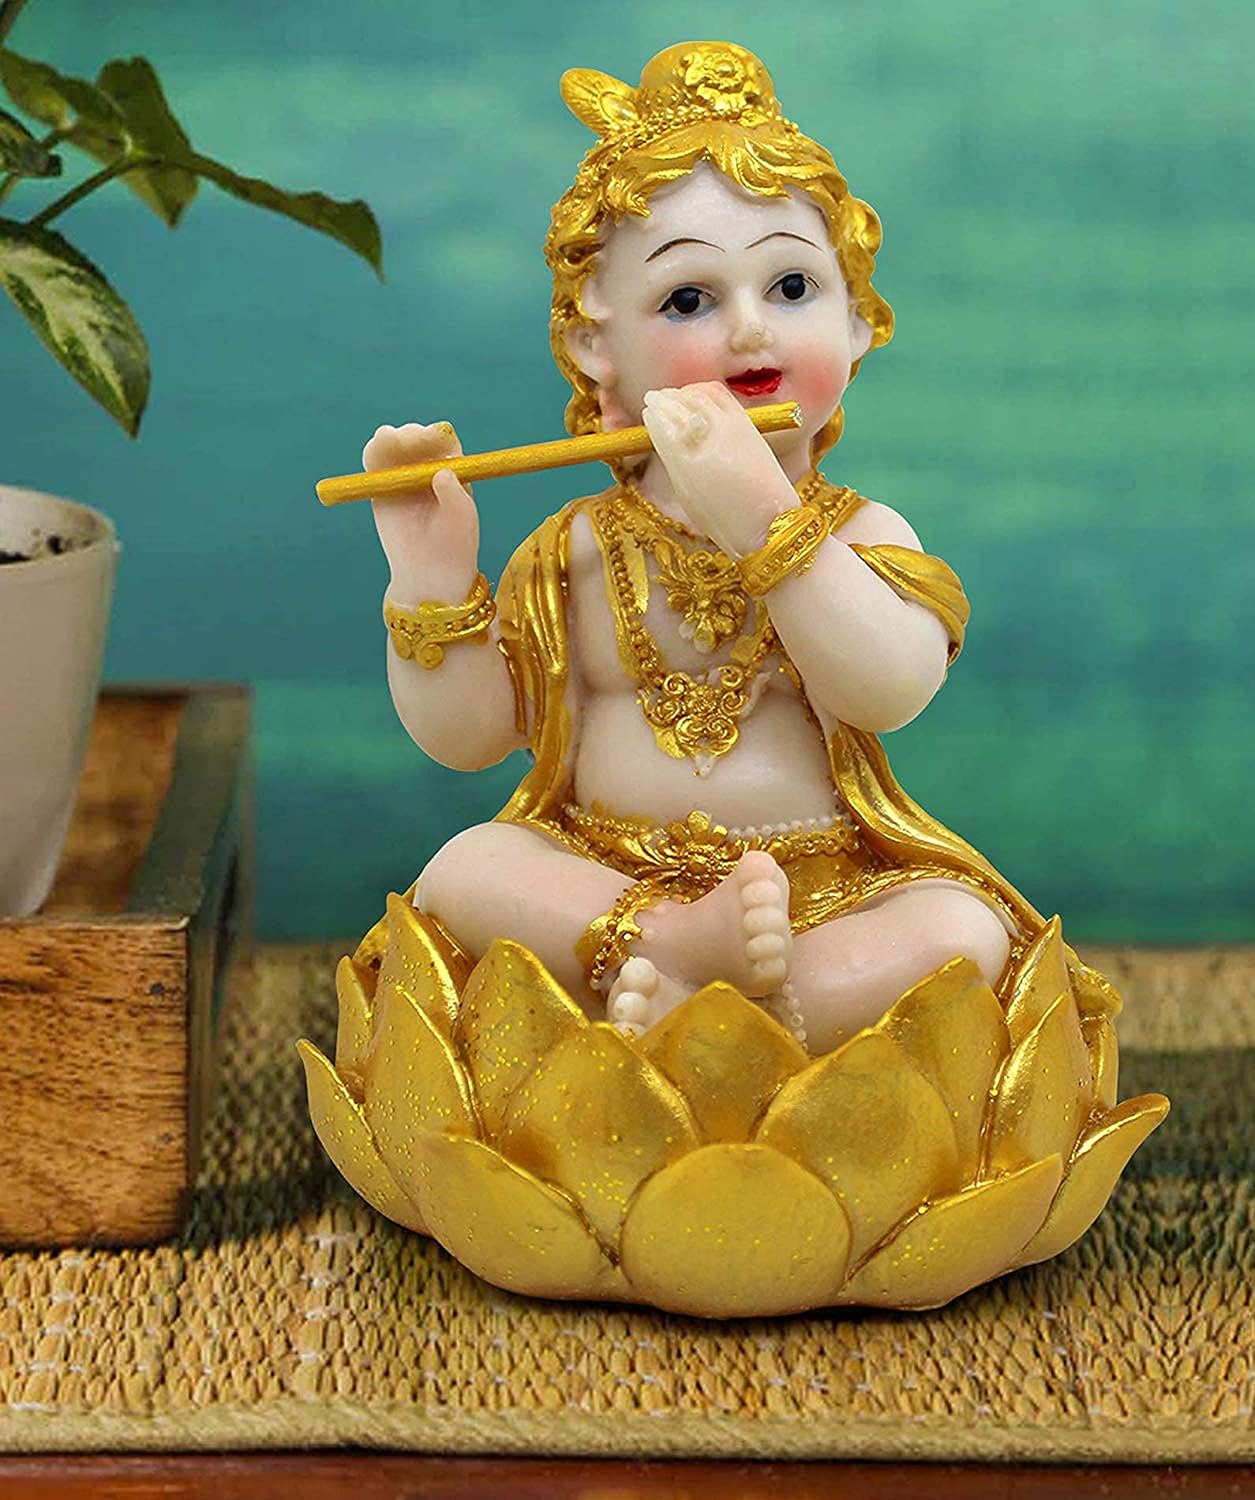 TIED RIBBONS Krishna Statue Hindu God Resin Statue | 5.2 X 4 Inch | Krishna Idol Figurine Decorative Showpiece for Table, House Warming Gifting, Diwali Decorations for Home and Diwali Gifts